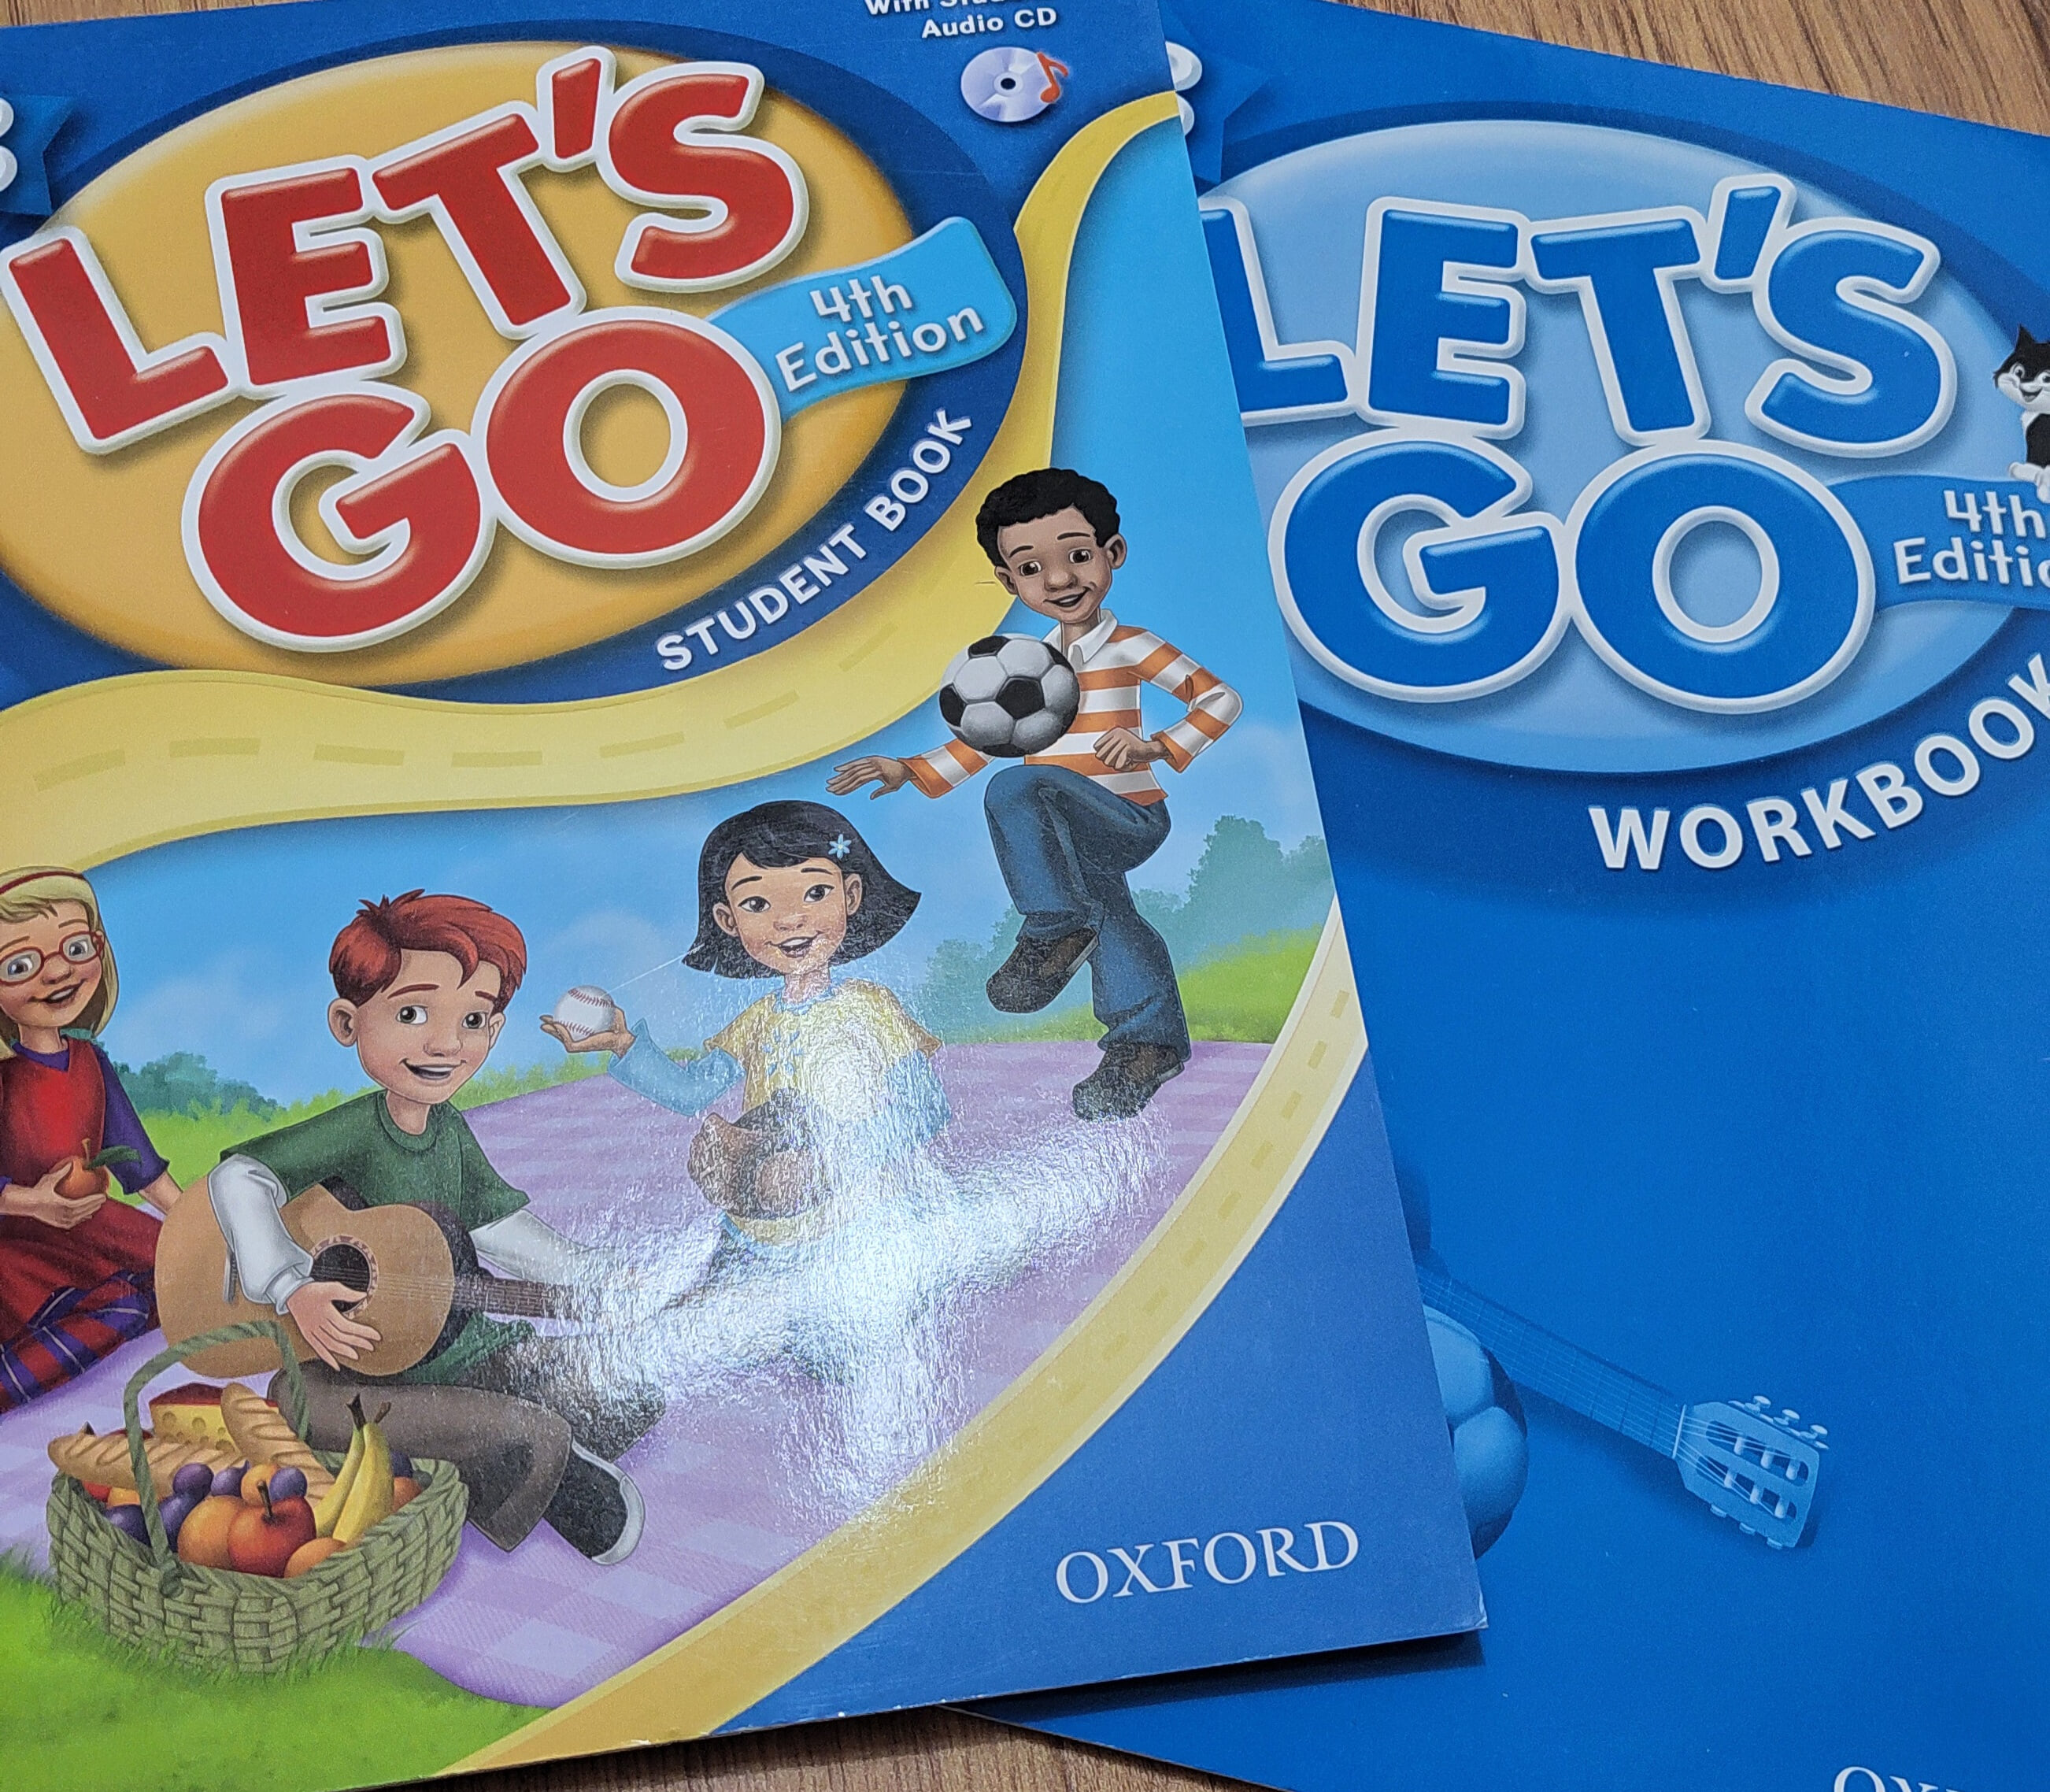 Let's Go: 3: Student Book With Audio CD Pack